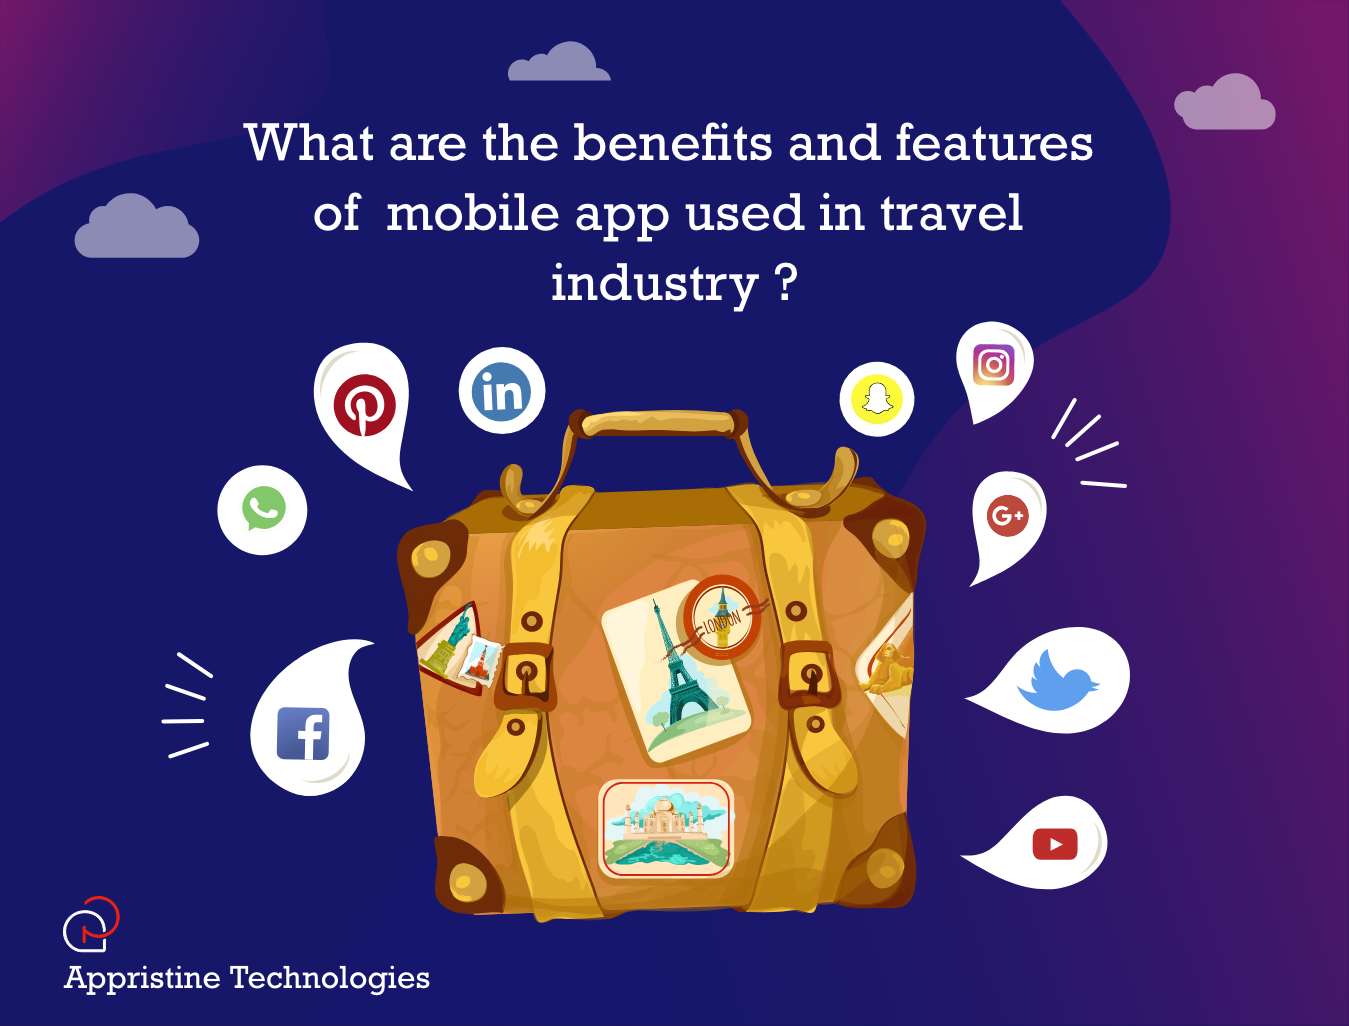 What are the benefits and features of the mobile app used in the travel industry?